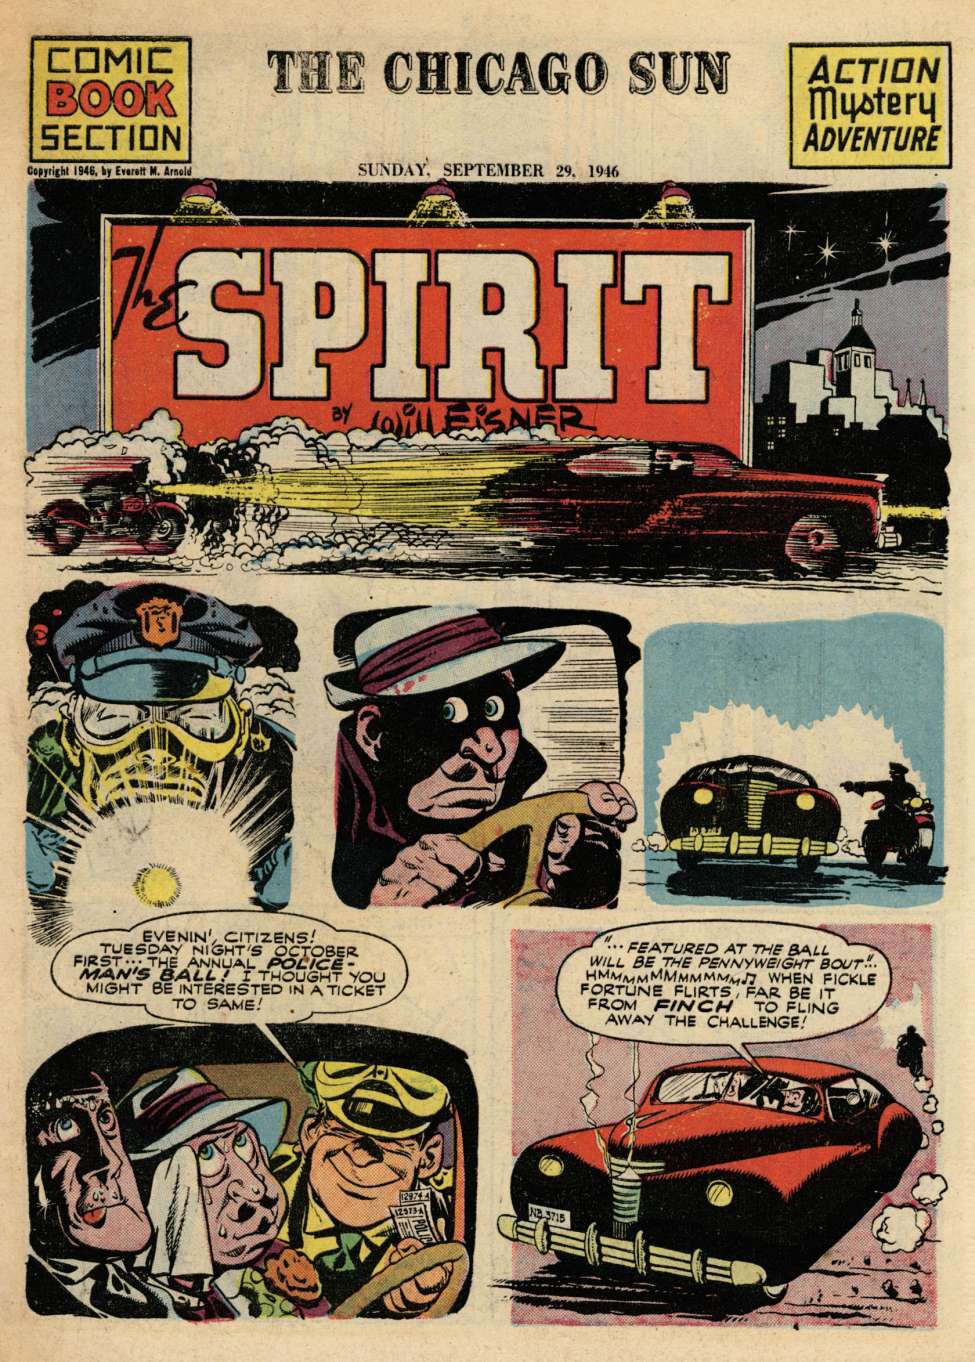 Comic Book Cover For The Spirit (1946-09-29) - Chicago Sun